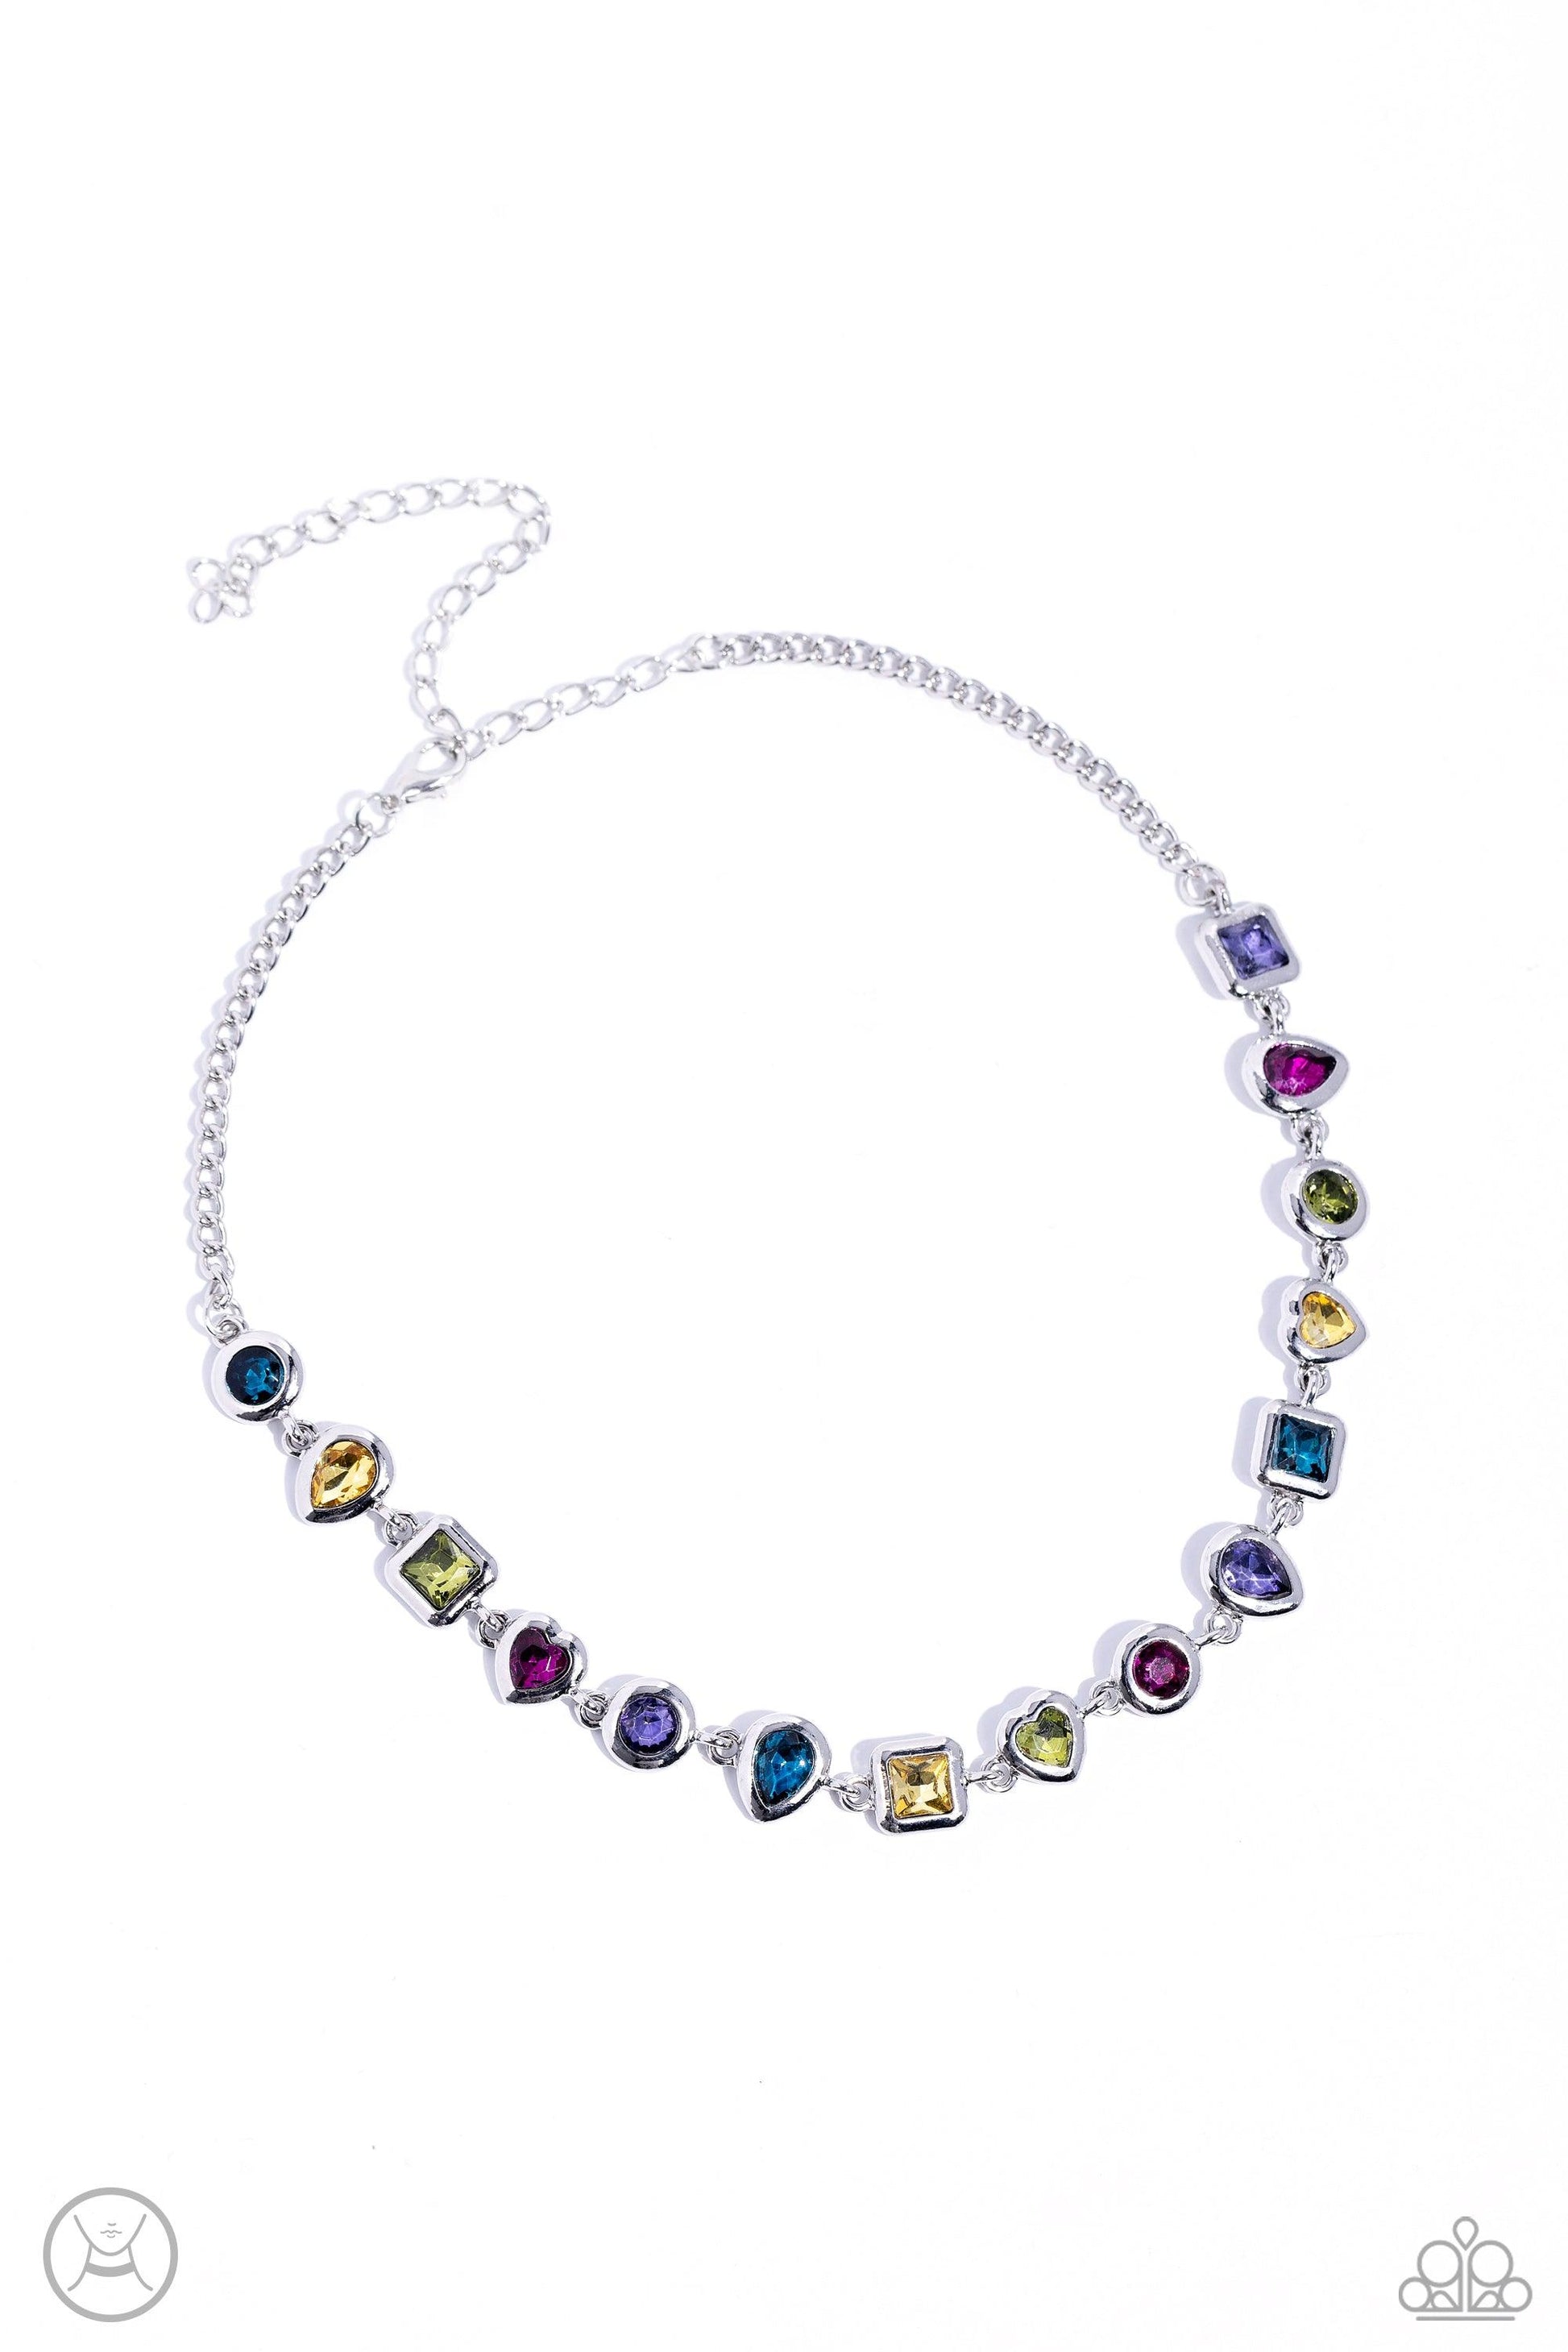 Paparazzi Accessories - Abstract Admirer - Multicolor Choker Necklace - Bling by JessieK